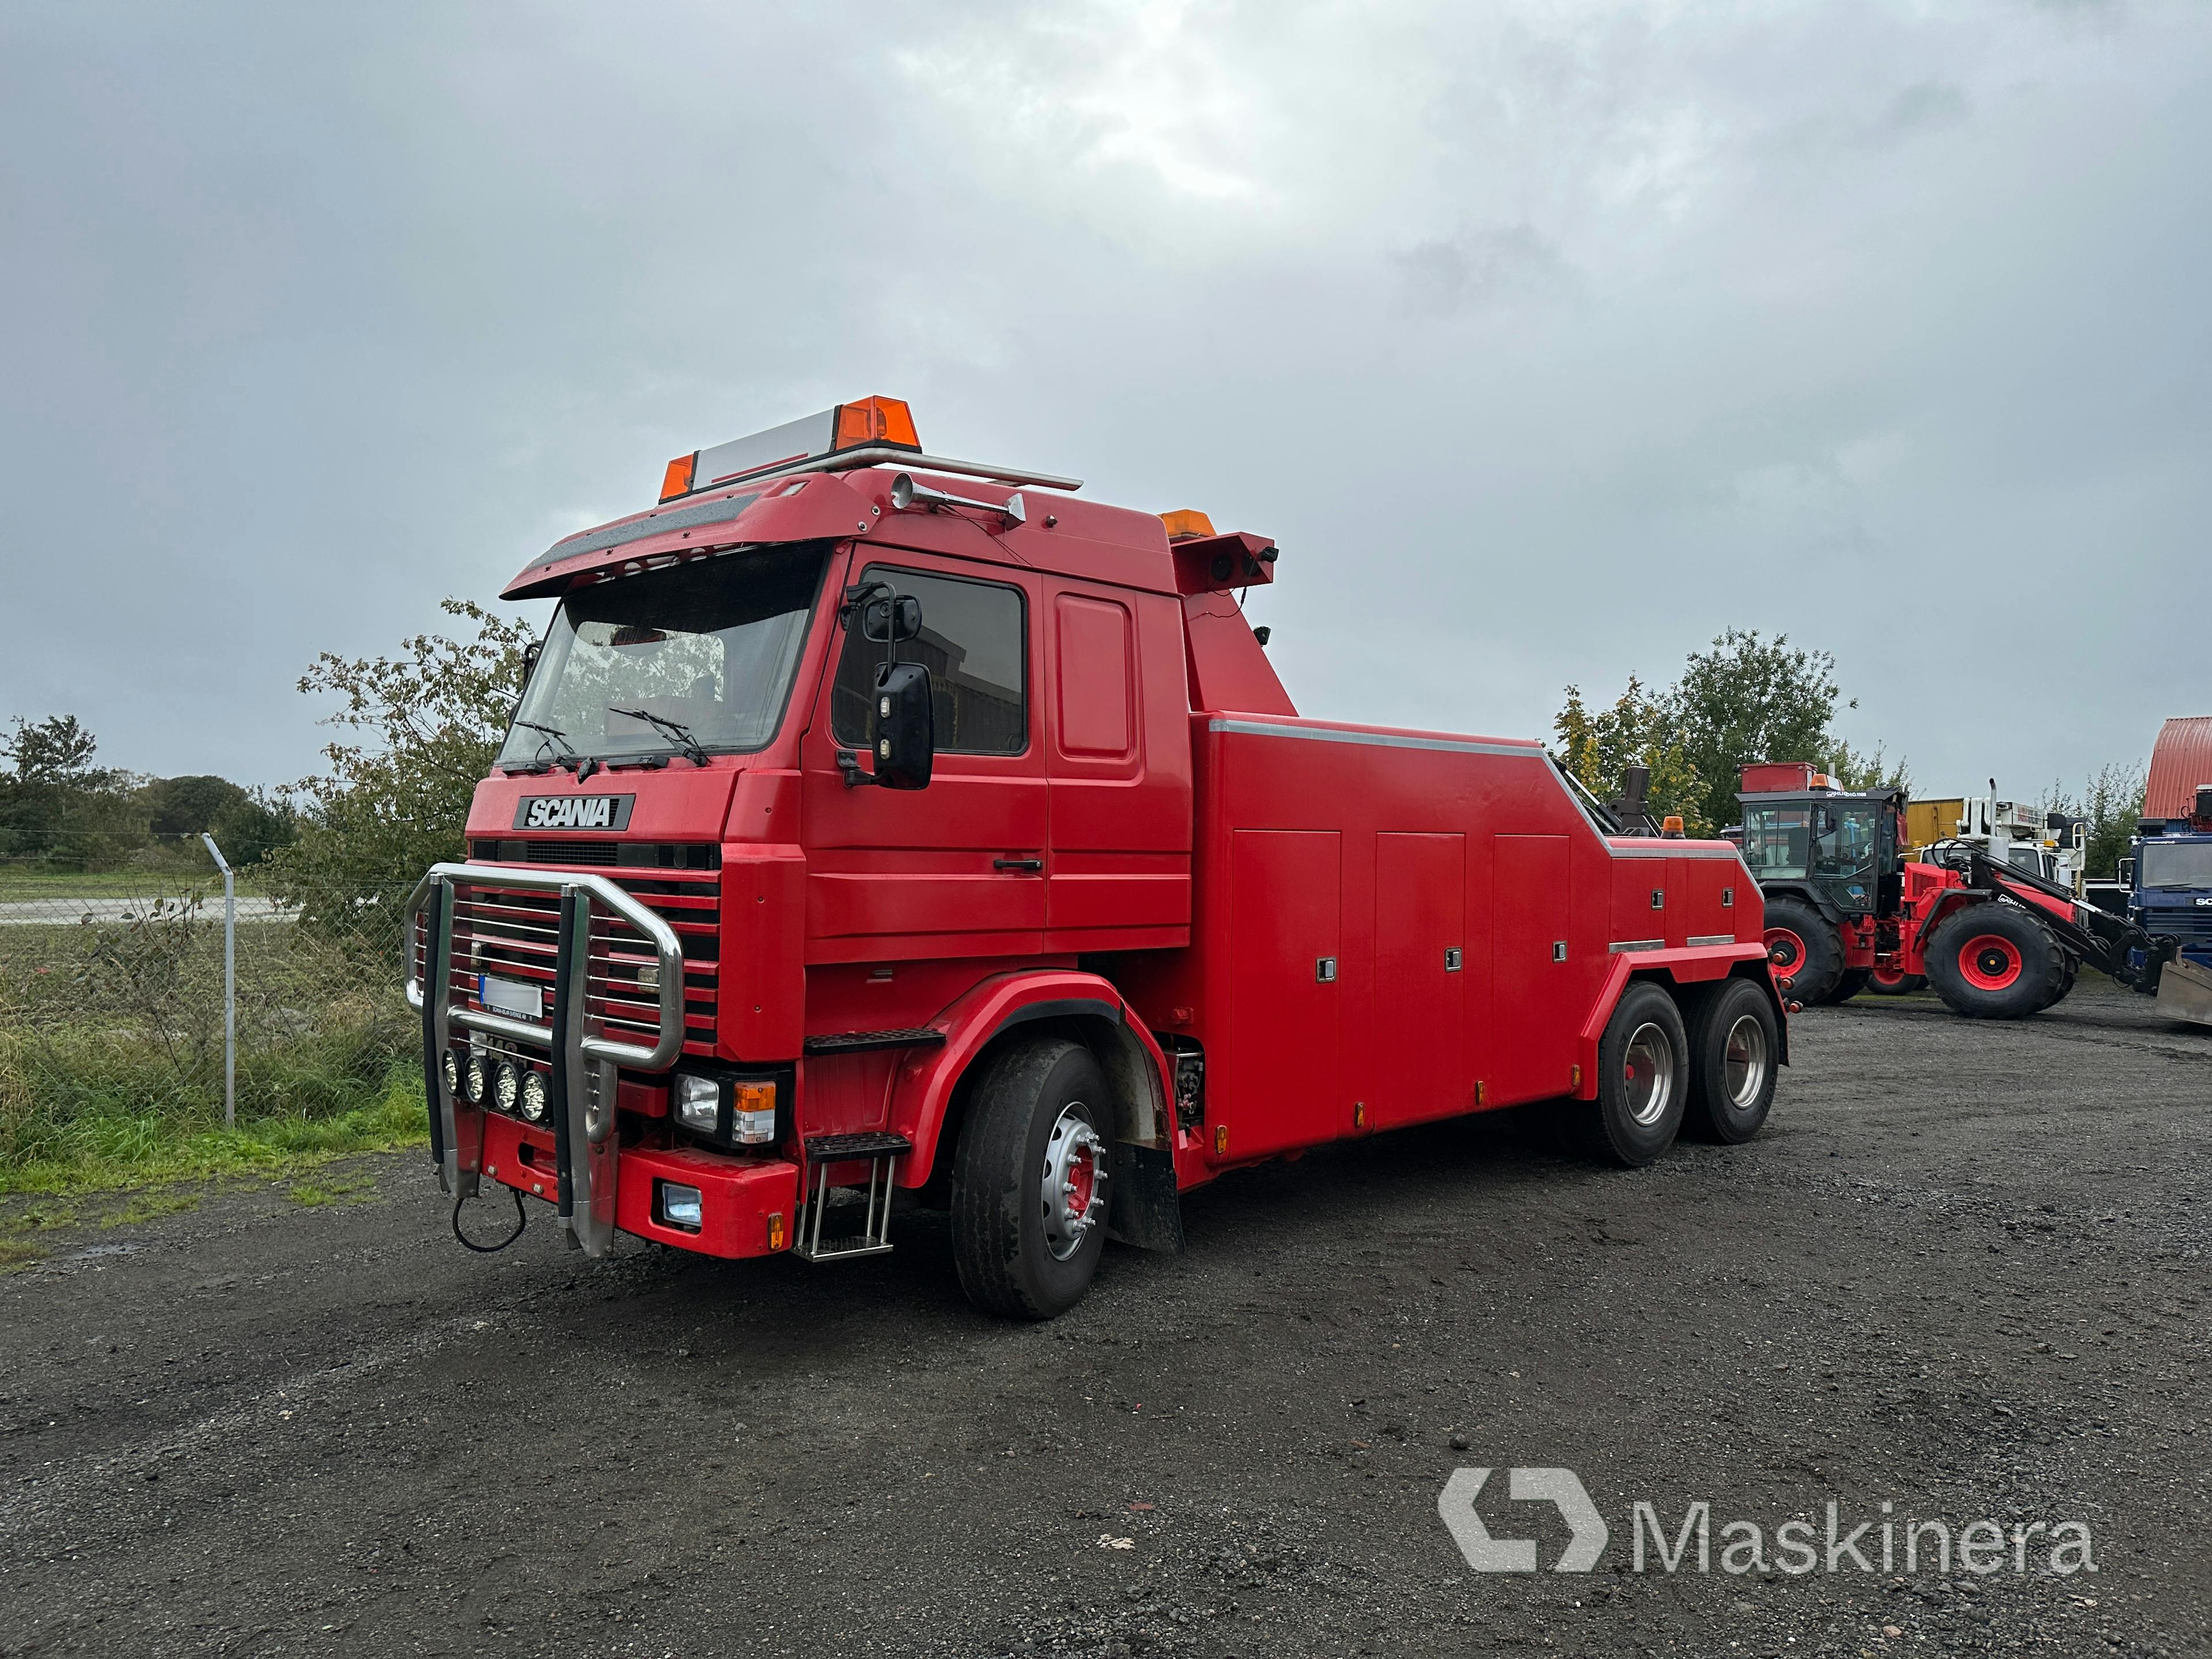 Salvage truck Scania R143H V8 6X2 Heavy salvage vehicle